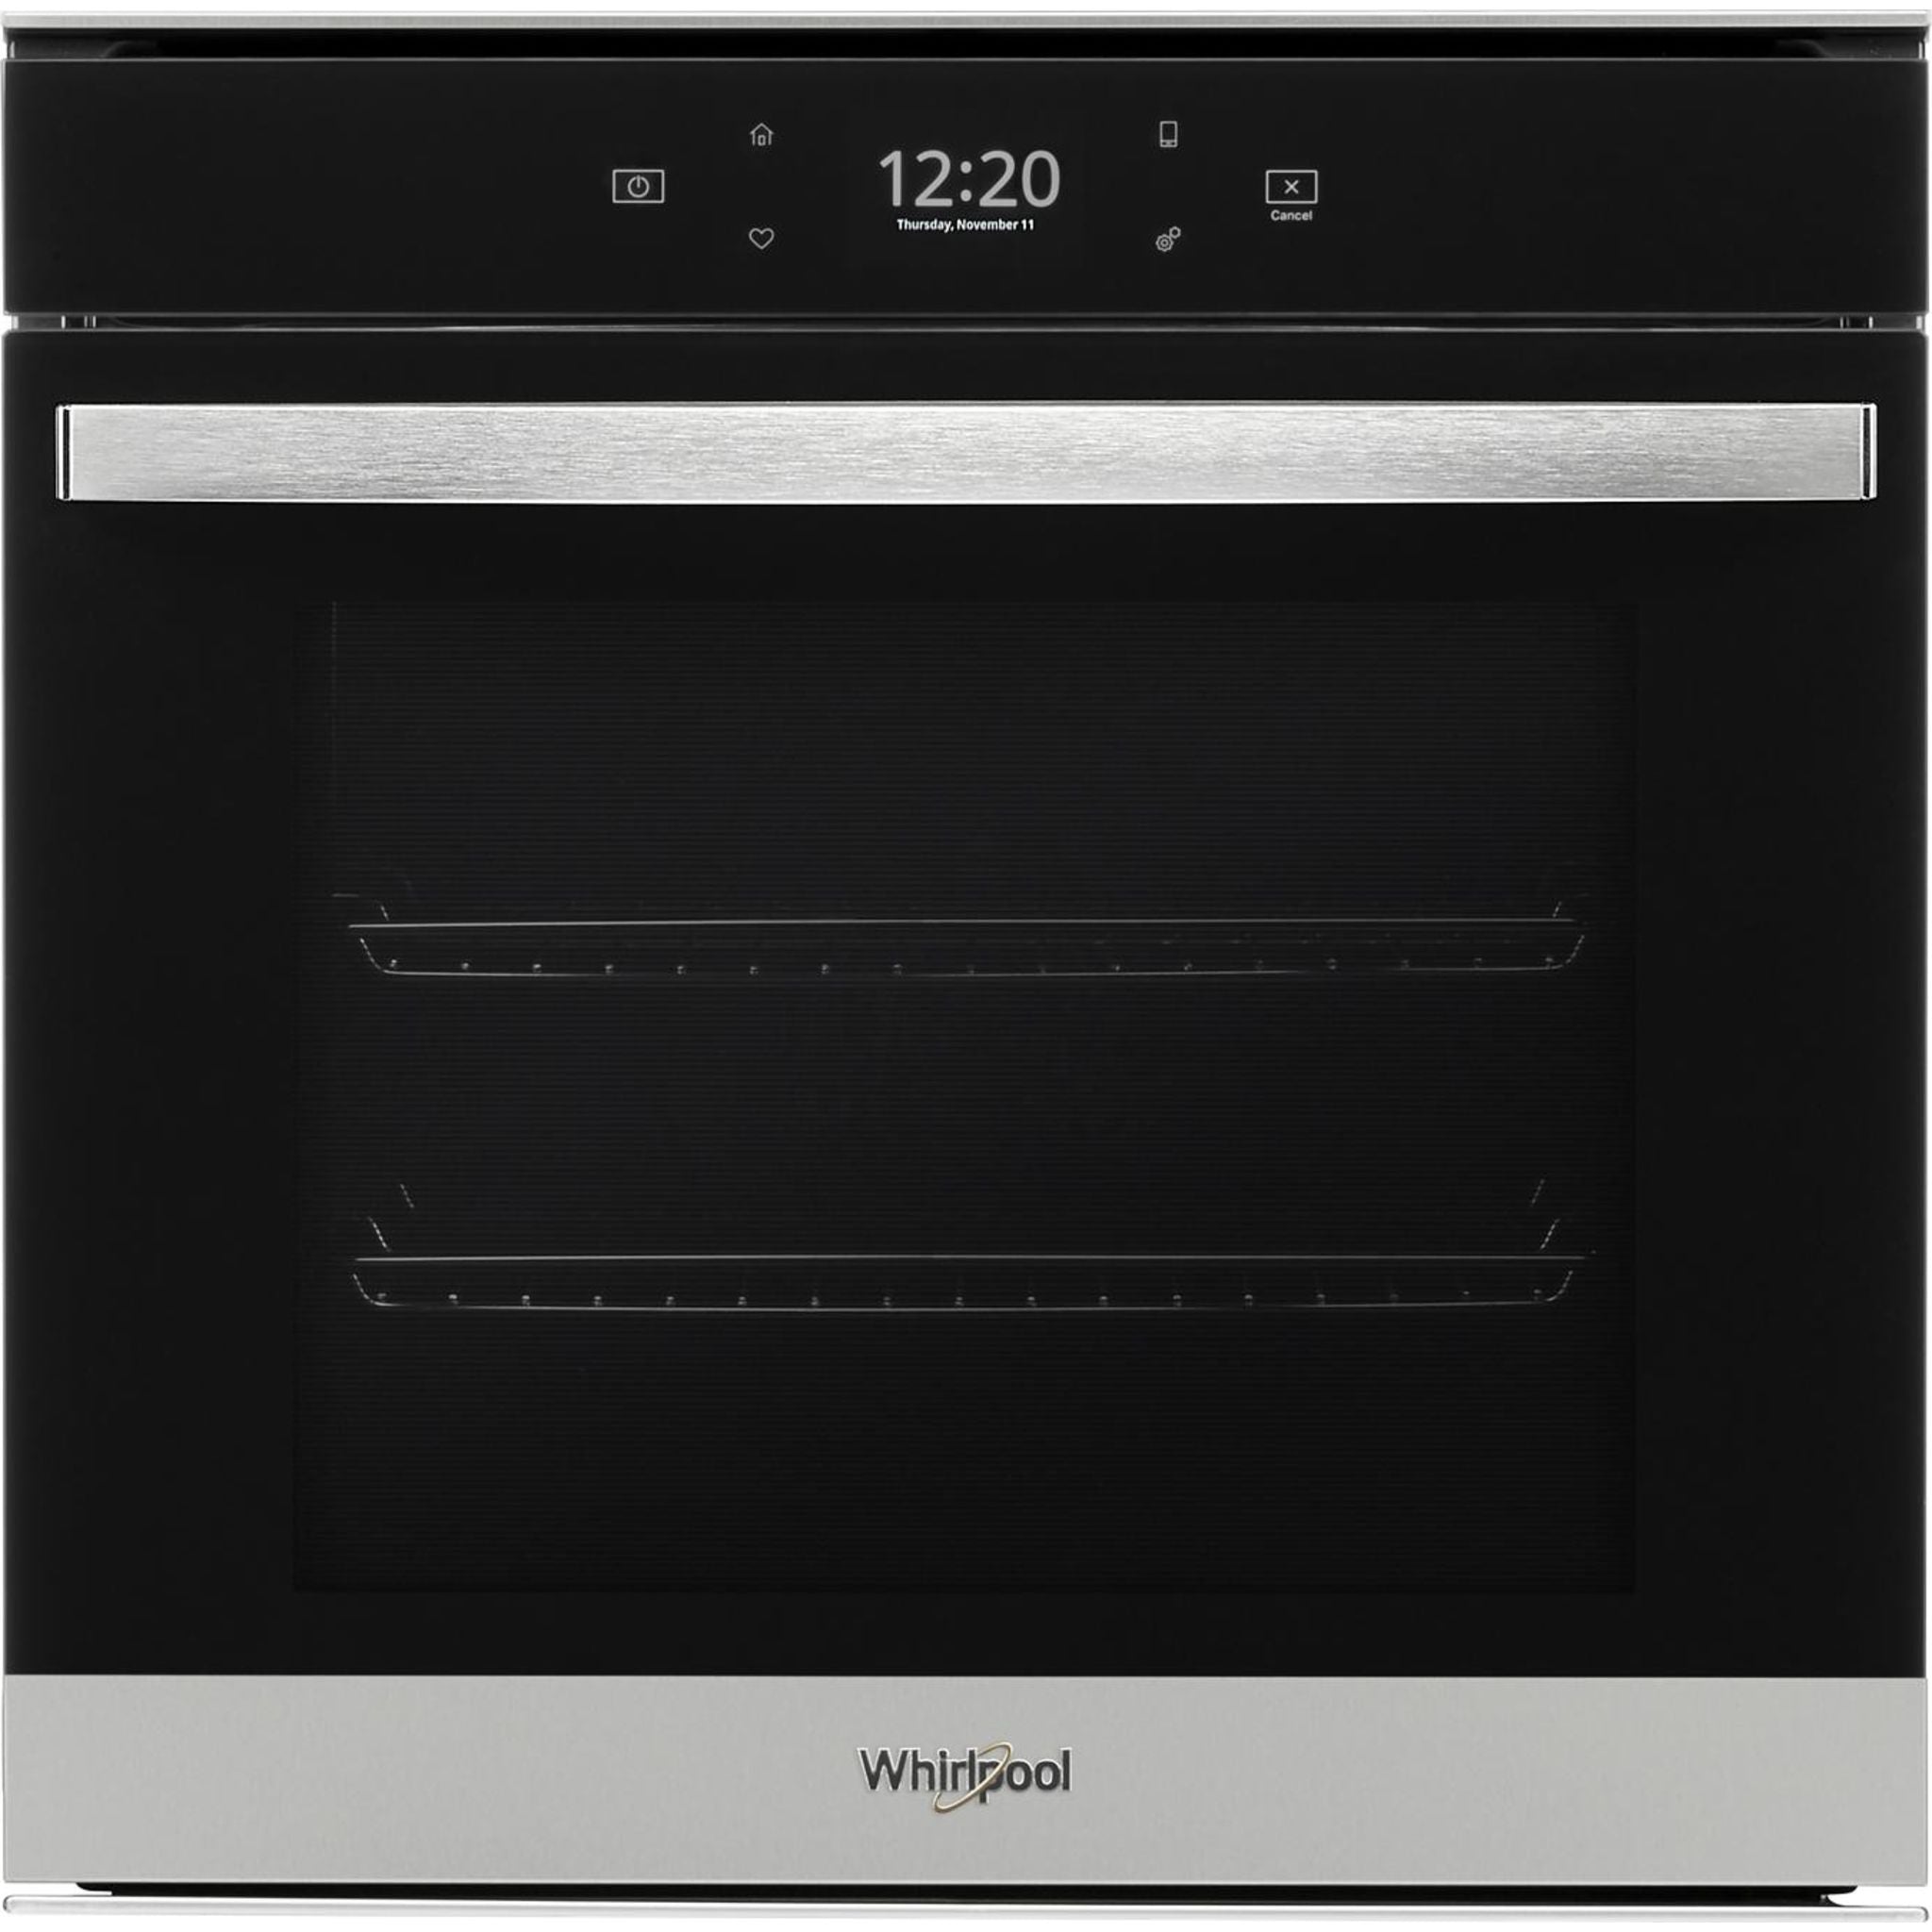 Whirlpool, Whirlpool 24" Wall Oven (YWOS52ES4MZ) - Stainless Steel